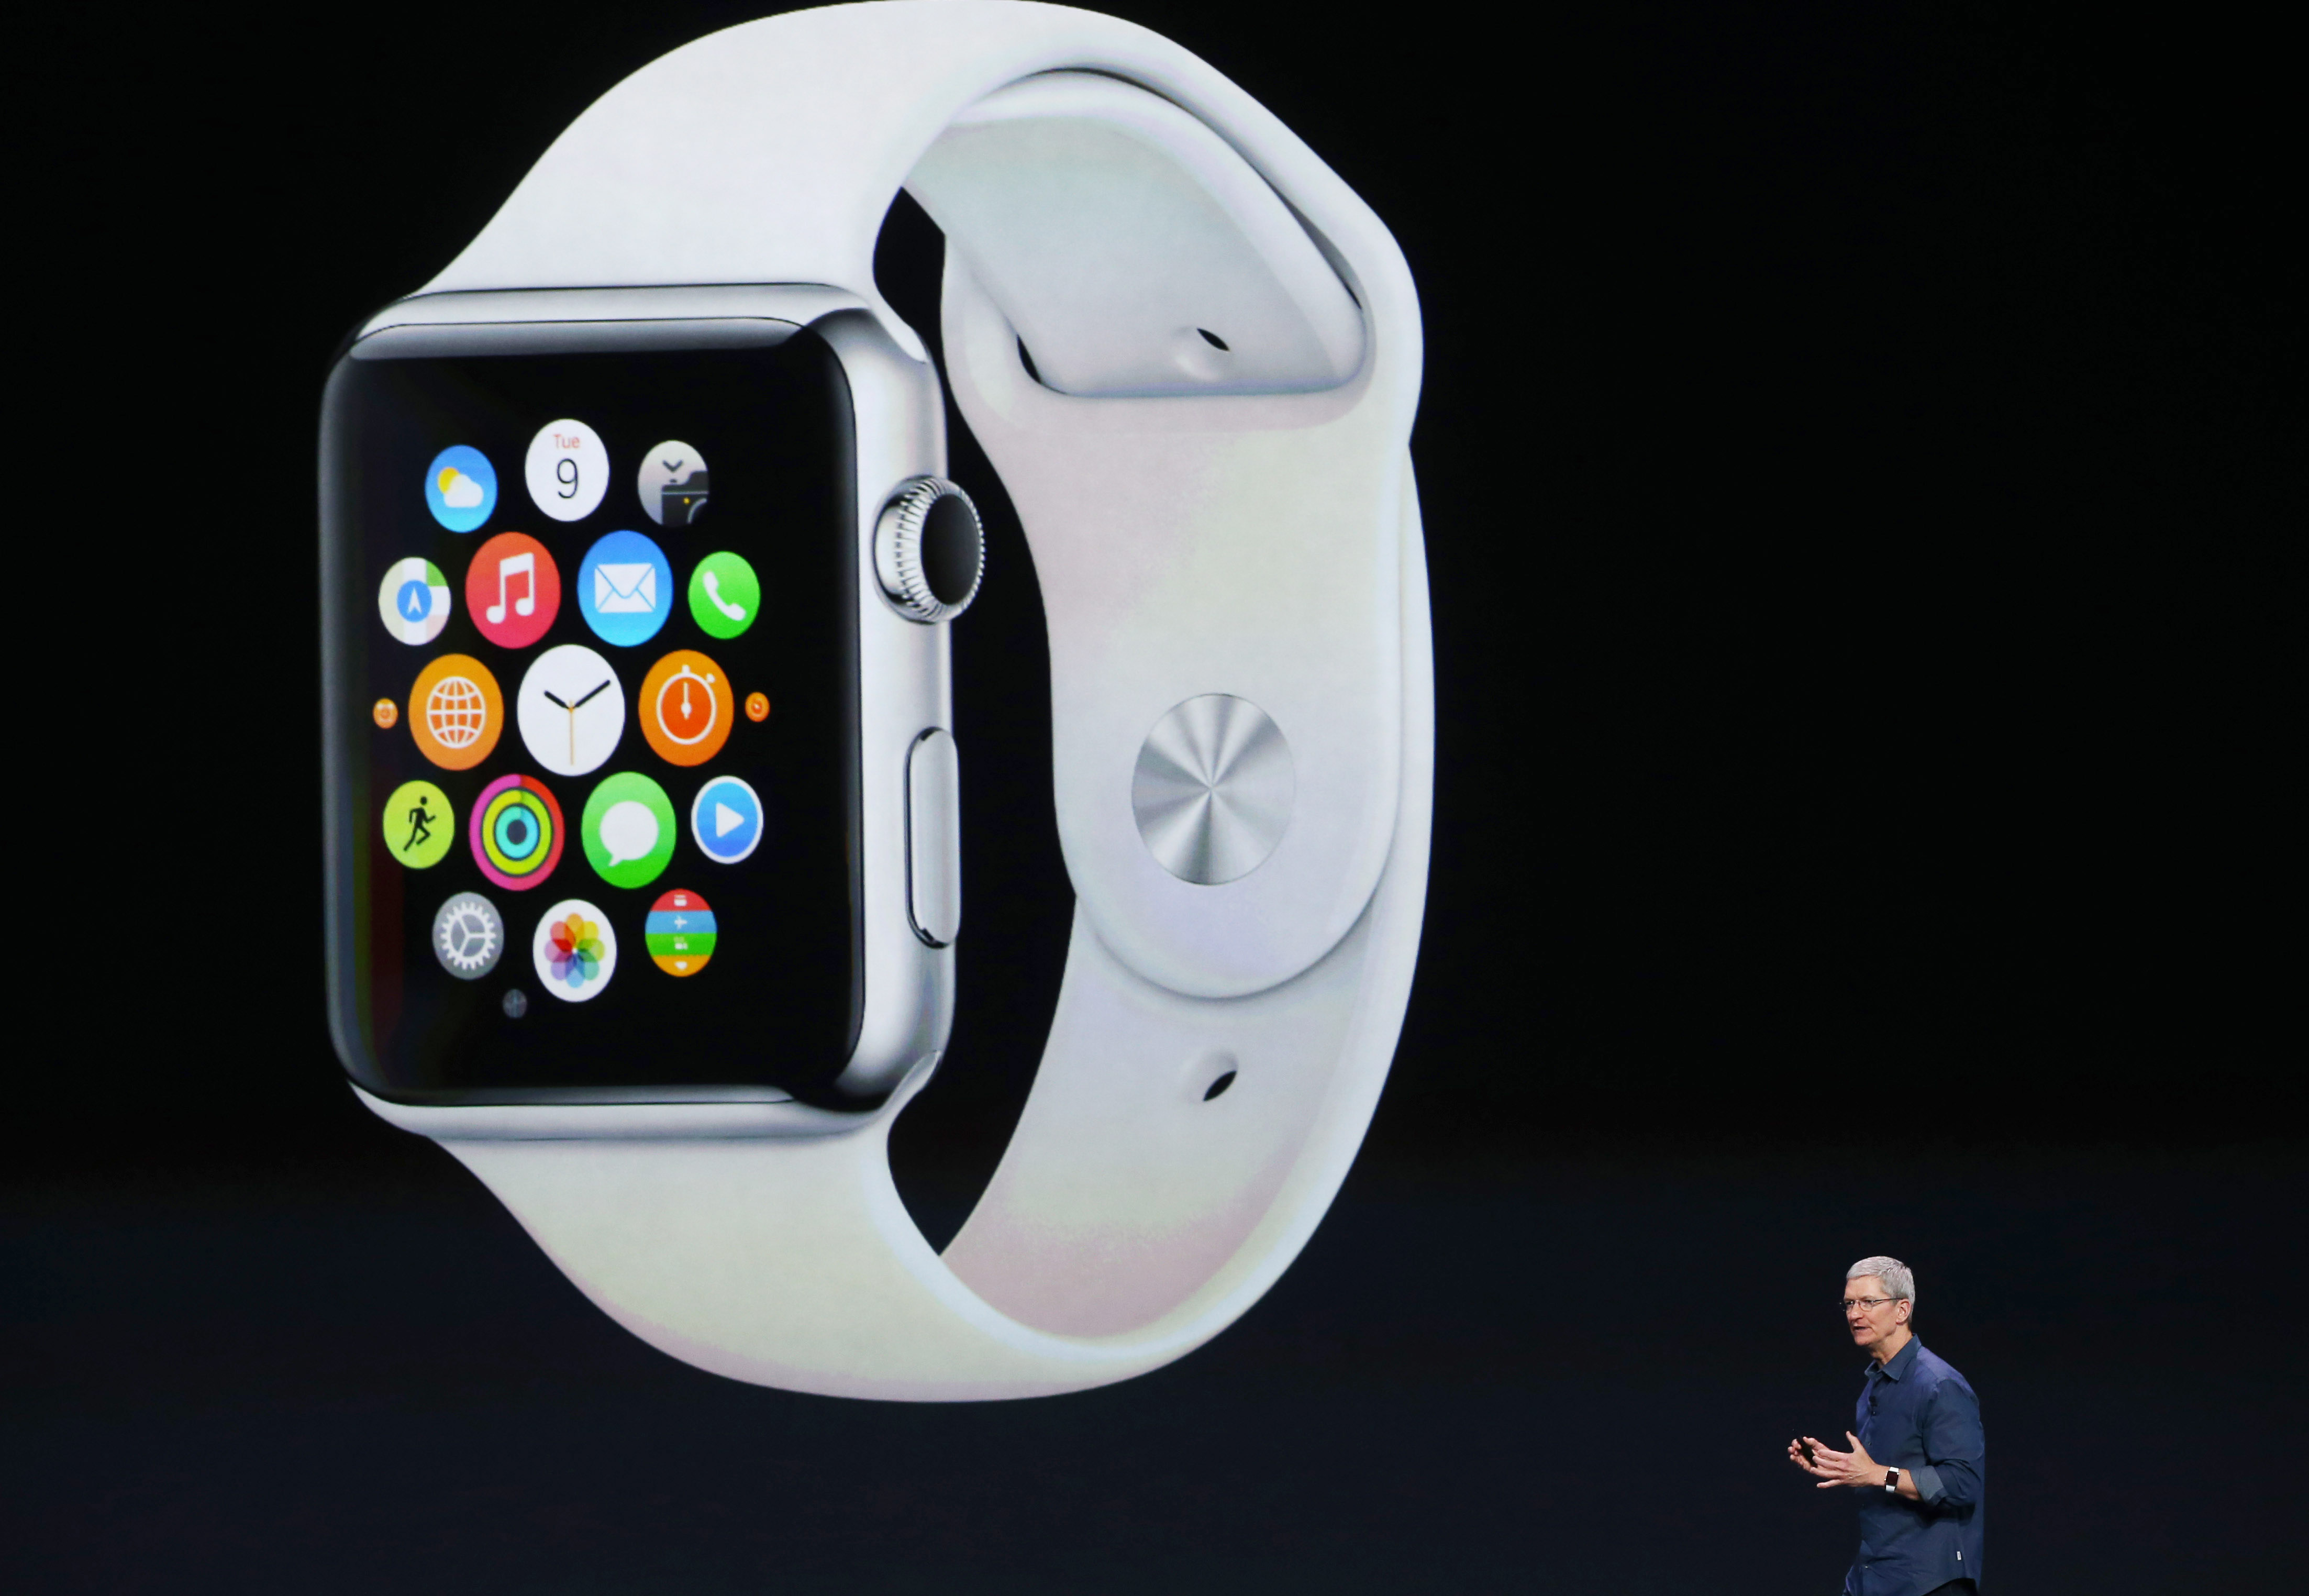 Apple CEO Tim Cook announces the Apple Watch at the Flint Center for the Performing Arts on September 9, 2014 in Cupertino, California. (Justin Sullivan—Getty Images)